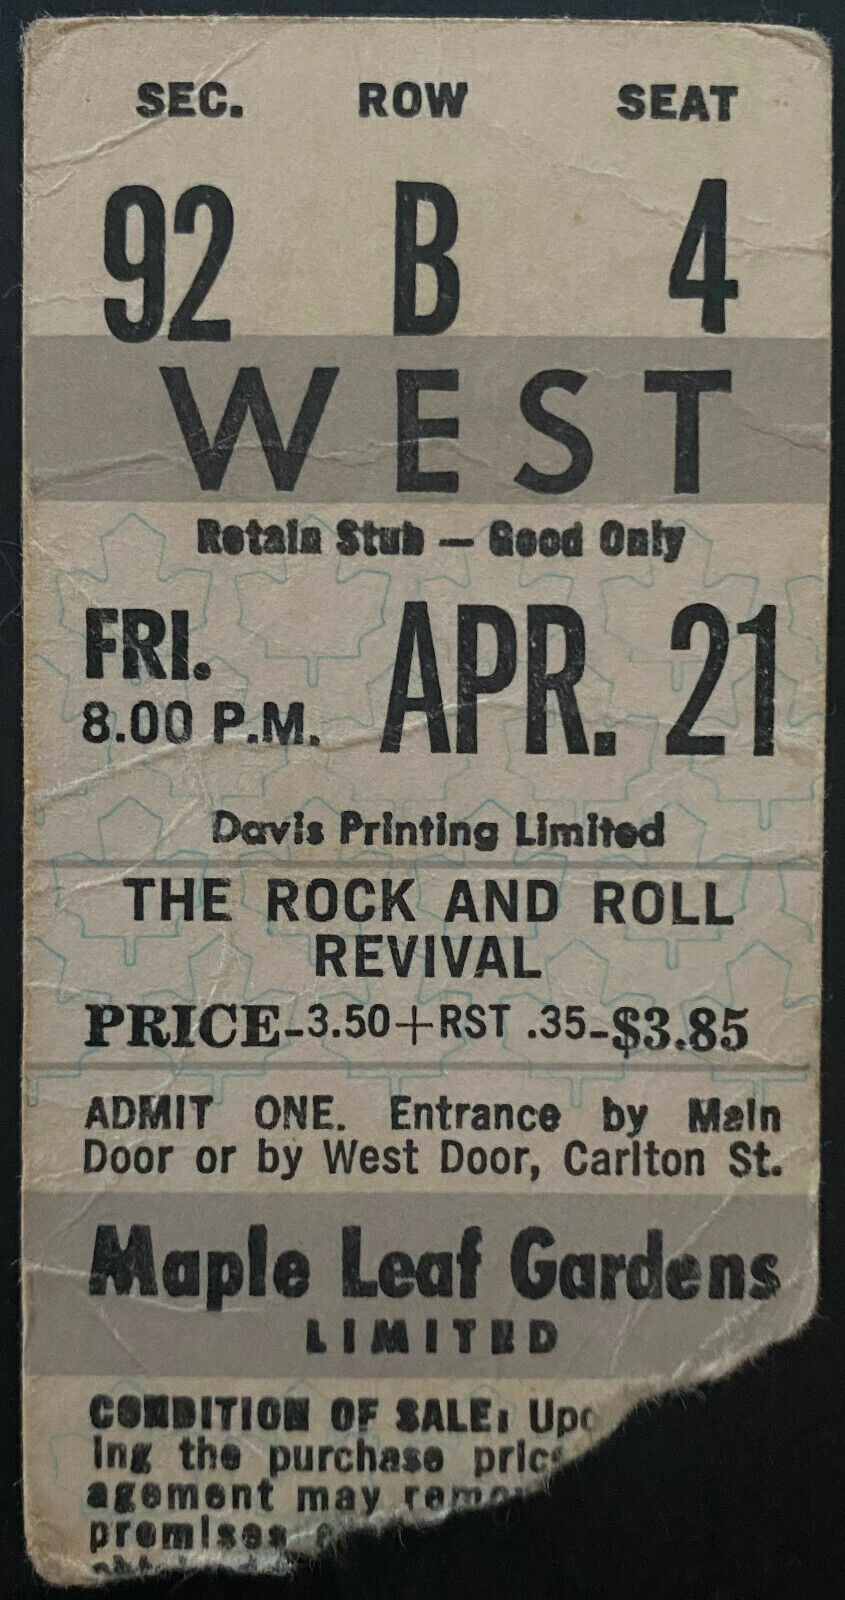 1972 Rock N Roll Revival Concert Ticket Maple Leaf Gardens Toronto Many Acts